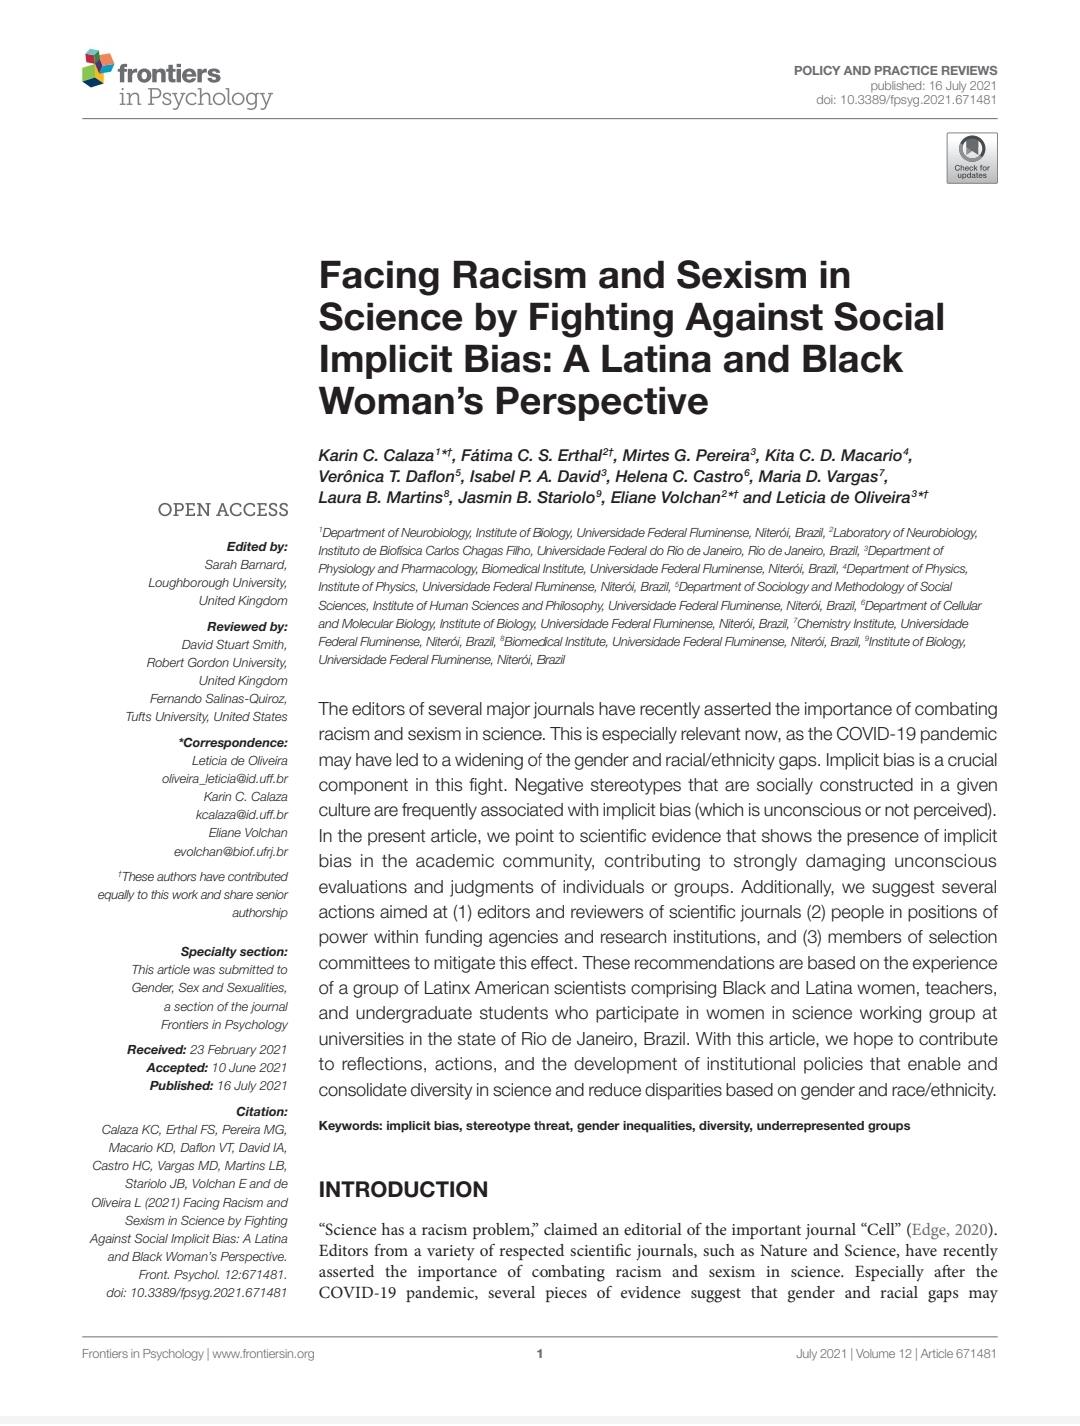 Facing Racism and Sexism in Science by Fighting Against Social Implicit Bias: A Latina and Black Woman’s Perspective